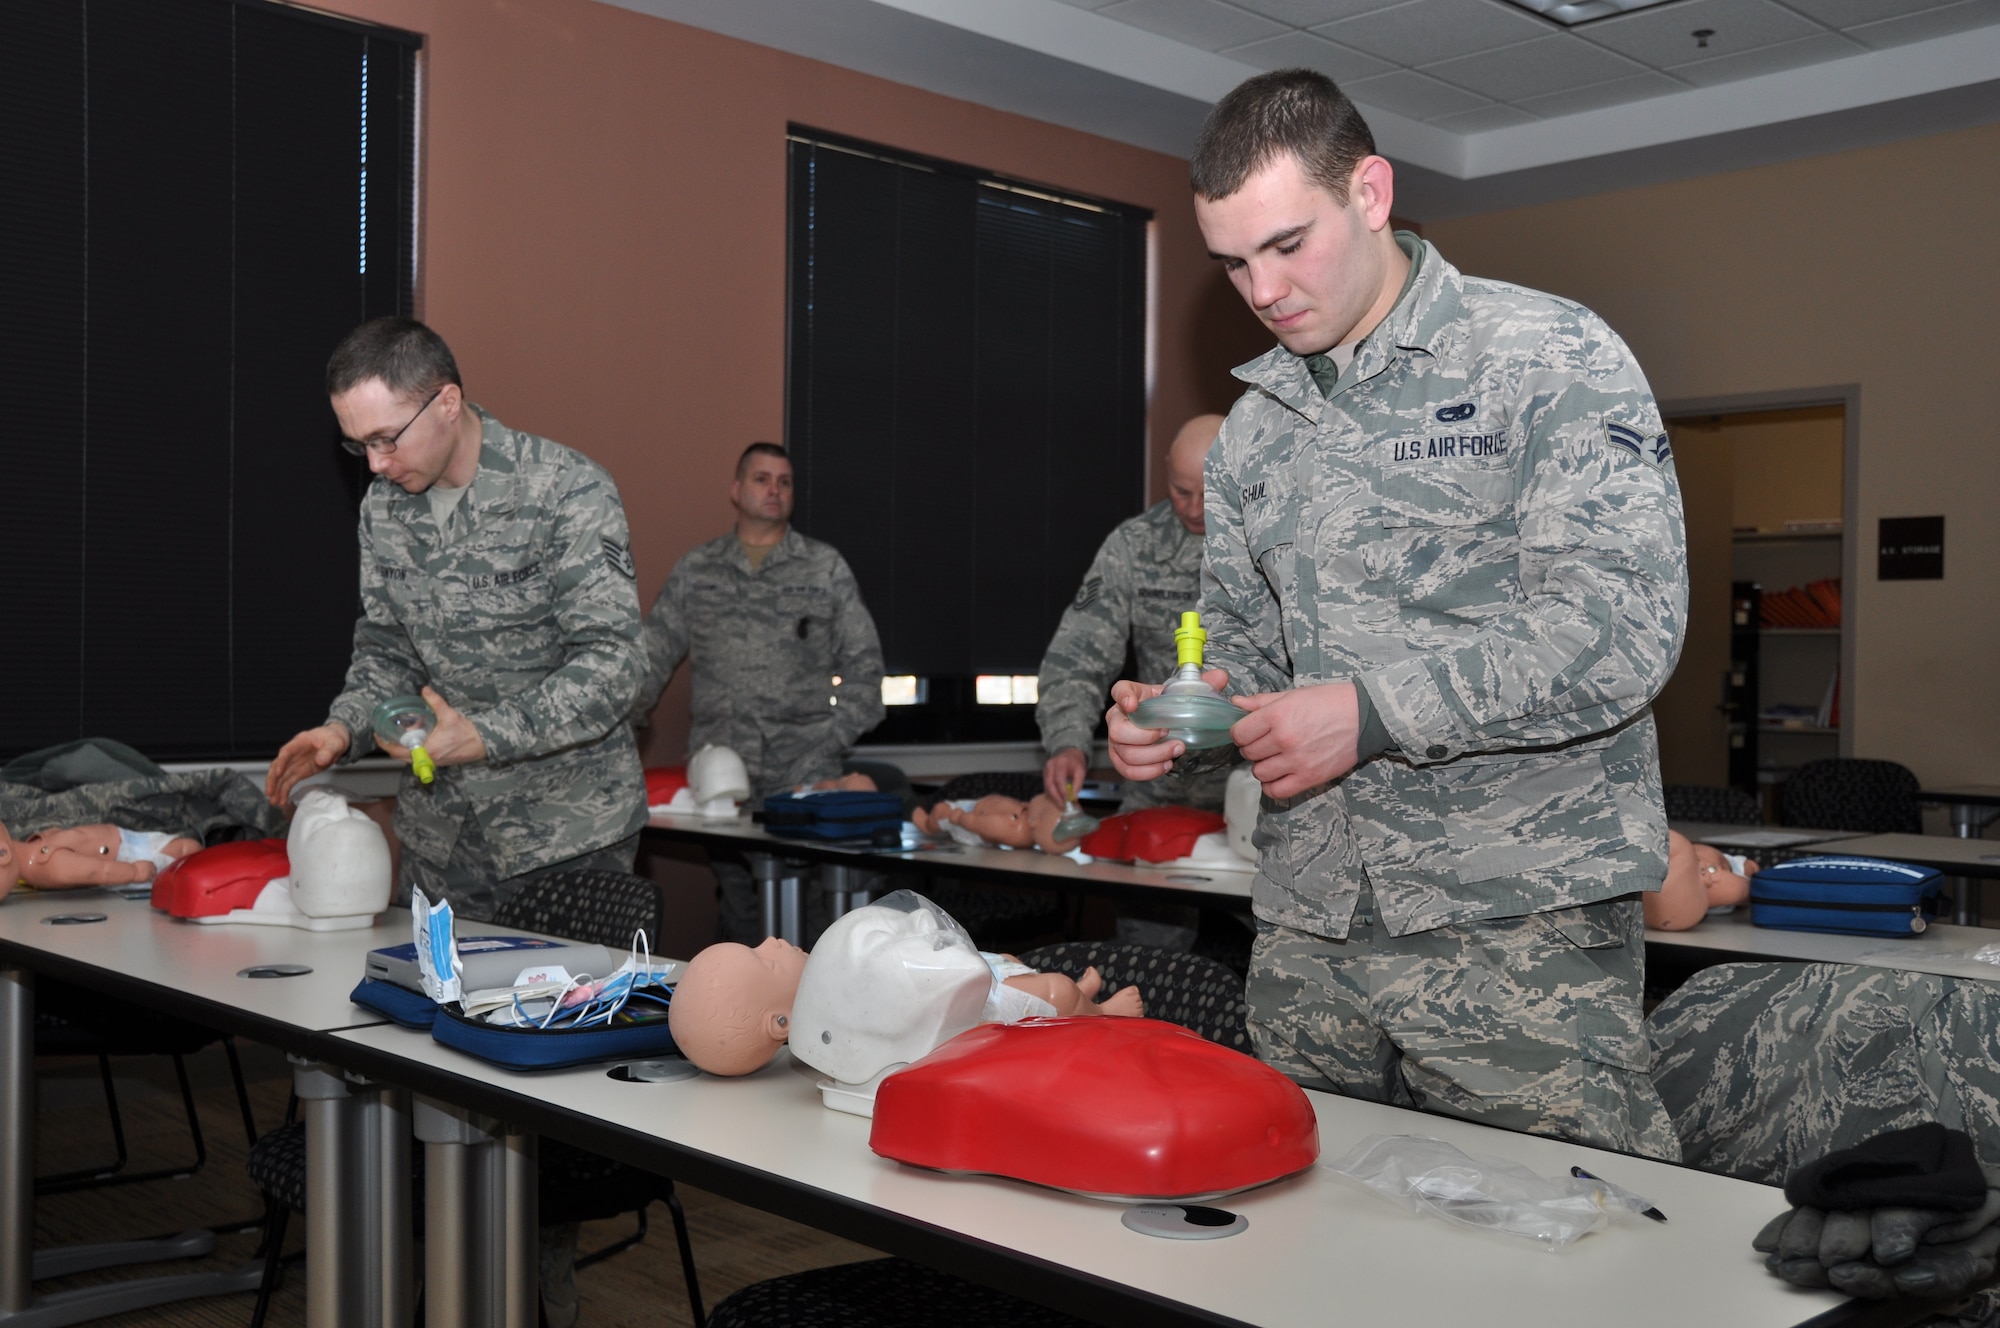 Airman 1st Class Michael Shul, 914th Maintenance Squadron, participates in a CPR class here, February 28, 2014. The training, instructed by members of the Base Fire Department, offered a combination of classroom and hands-on portions, where the Airmen tested their CPR skills on medical instruction dummies. (U.S. Air Force photo by Staff Sgt. Stephanie Clark)  